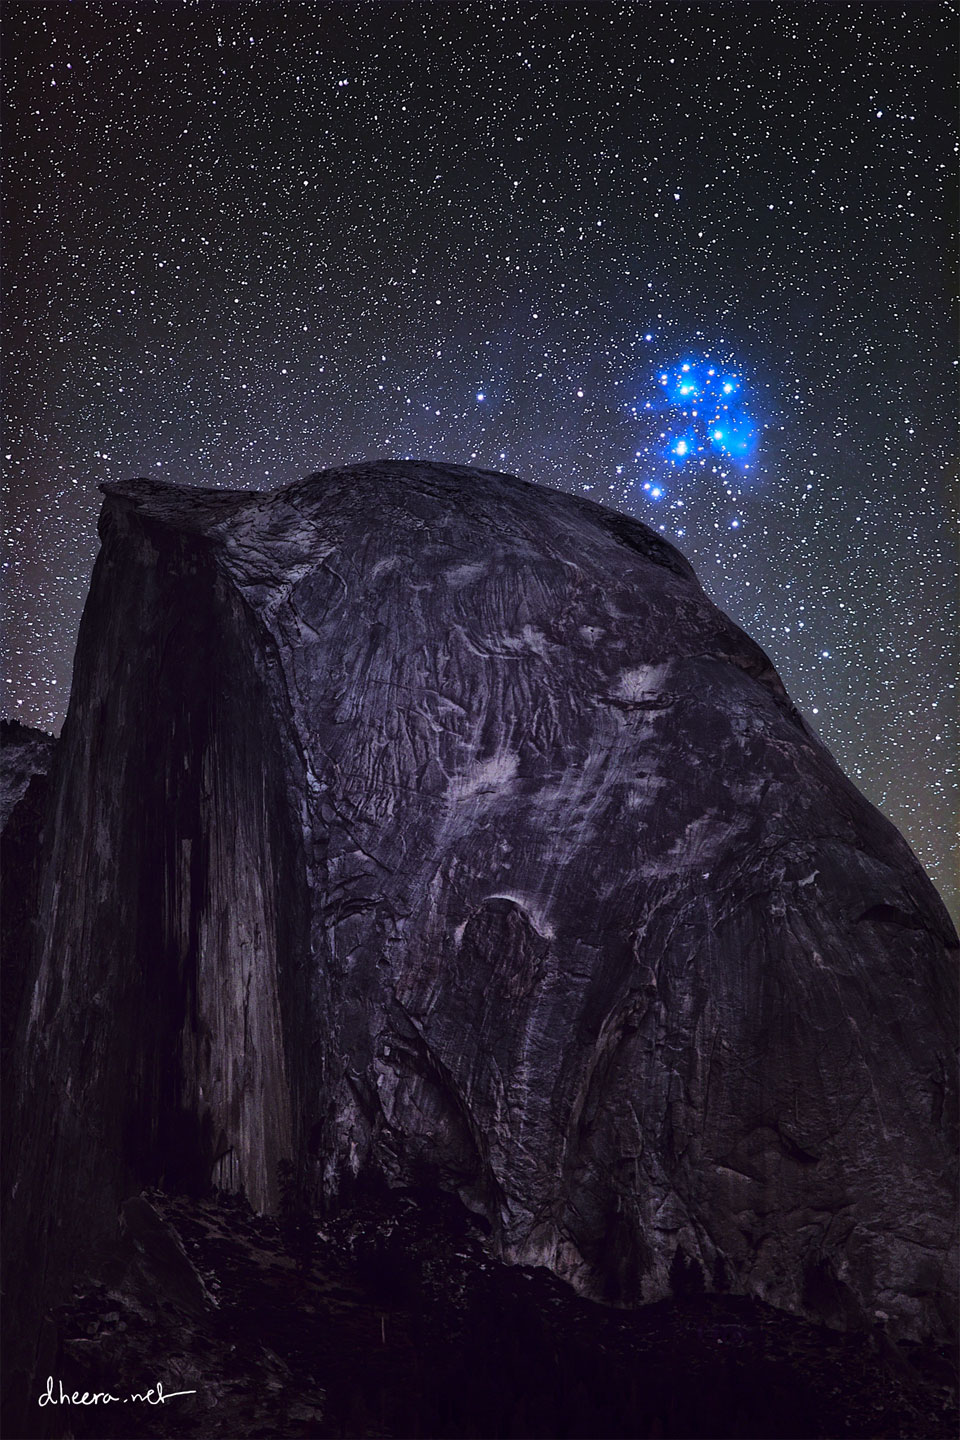 The featured image shows the bright blue Pleiades star cluster
behind Half Dome, a large circular rock formation that appears 
dark but with bright grooves.
Please see the explanation for more detailed information.